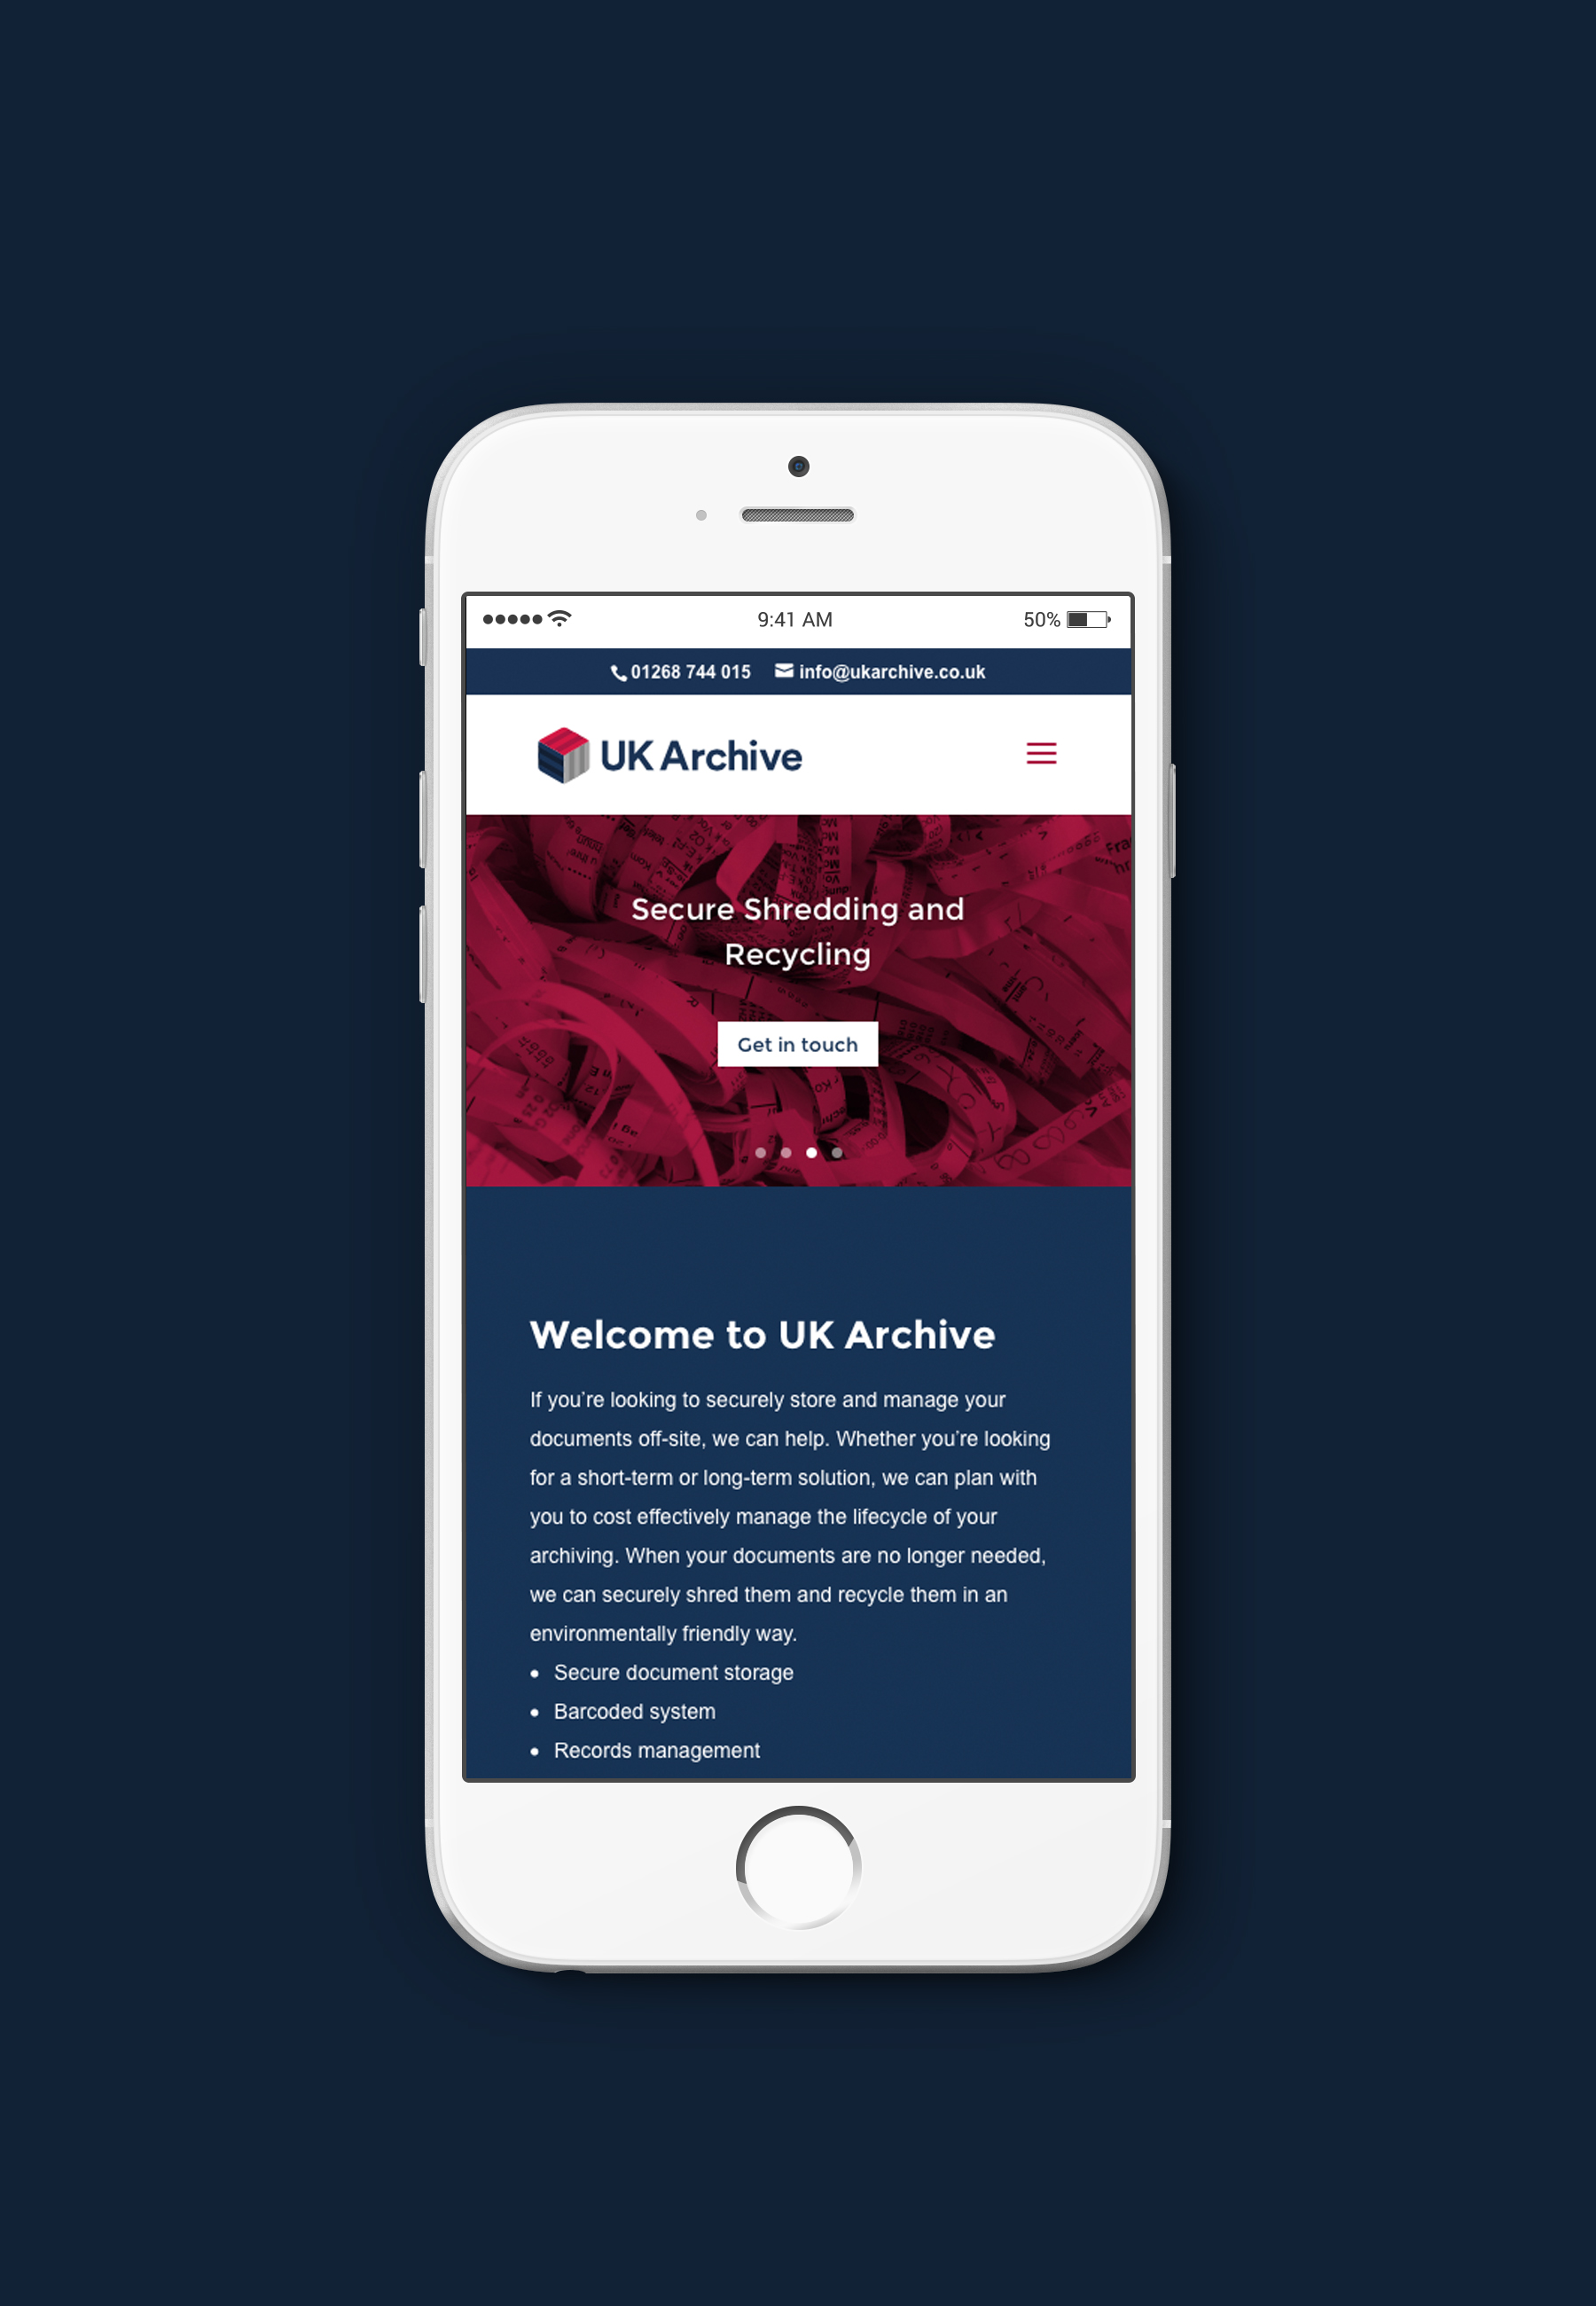 An image of an iPhone with the UK Archive website on the screen